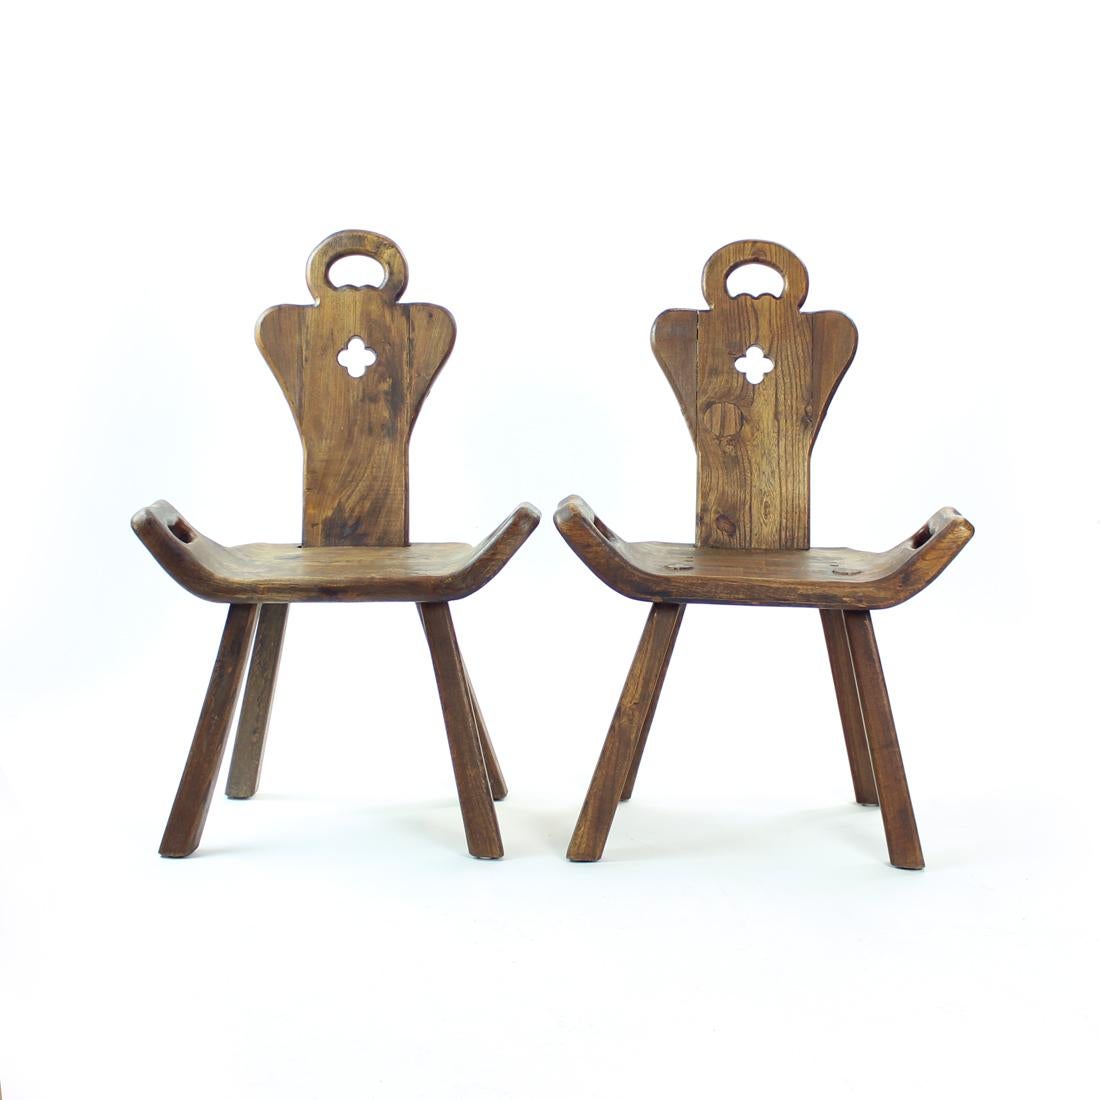 Wooden Handmade Occassional Chair, Holland 1920s For Sale 6